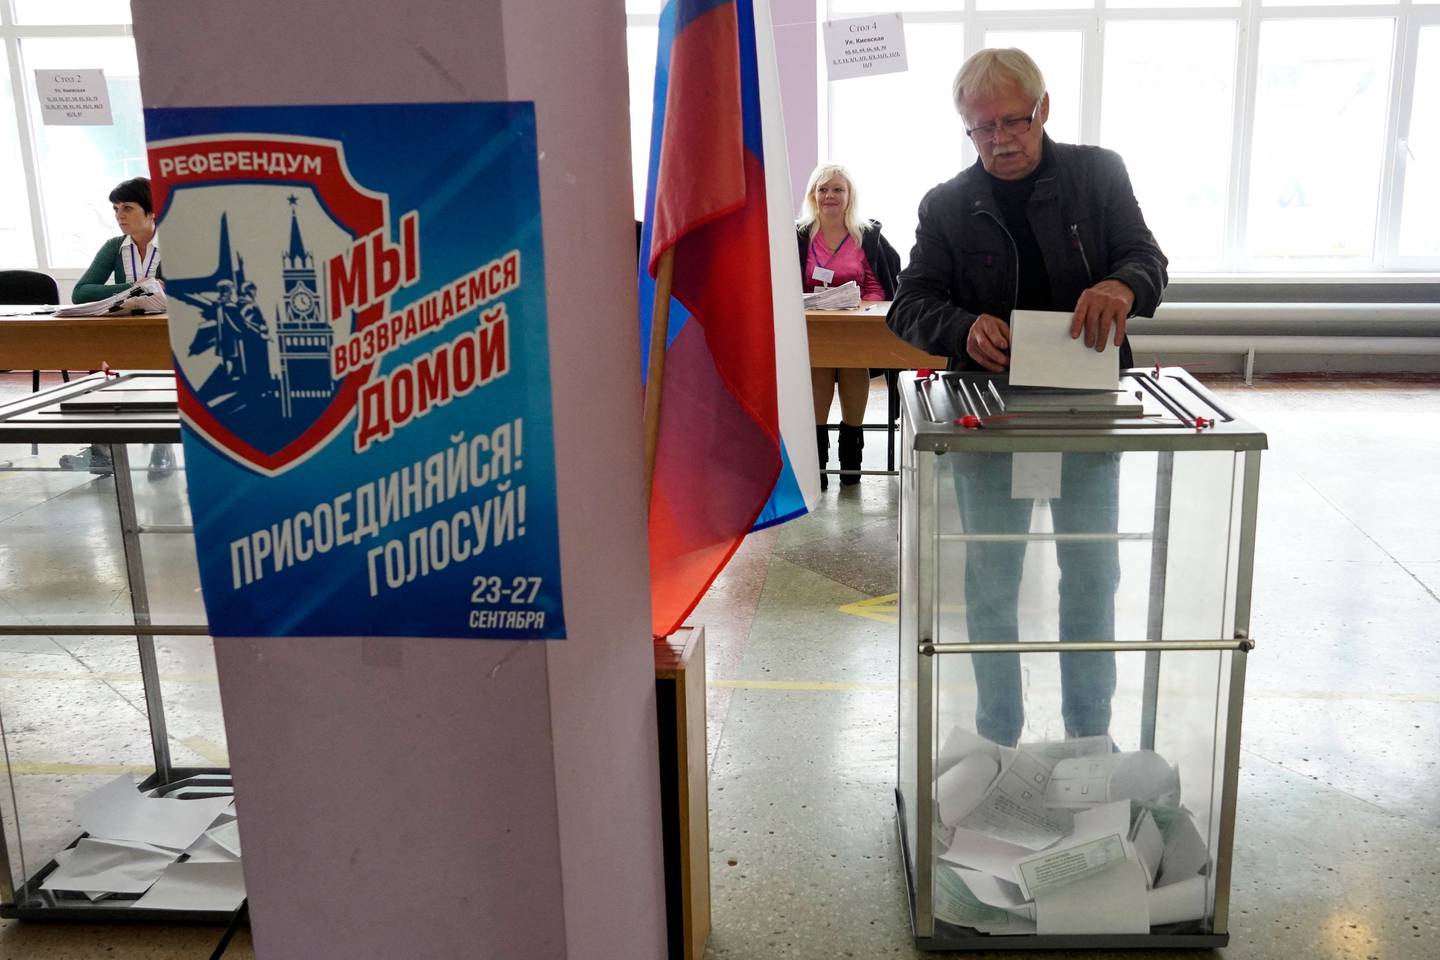 A man casts his ballot for a referendum at a polling station in Mariupol. AFP